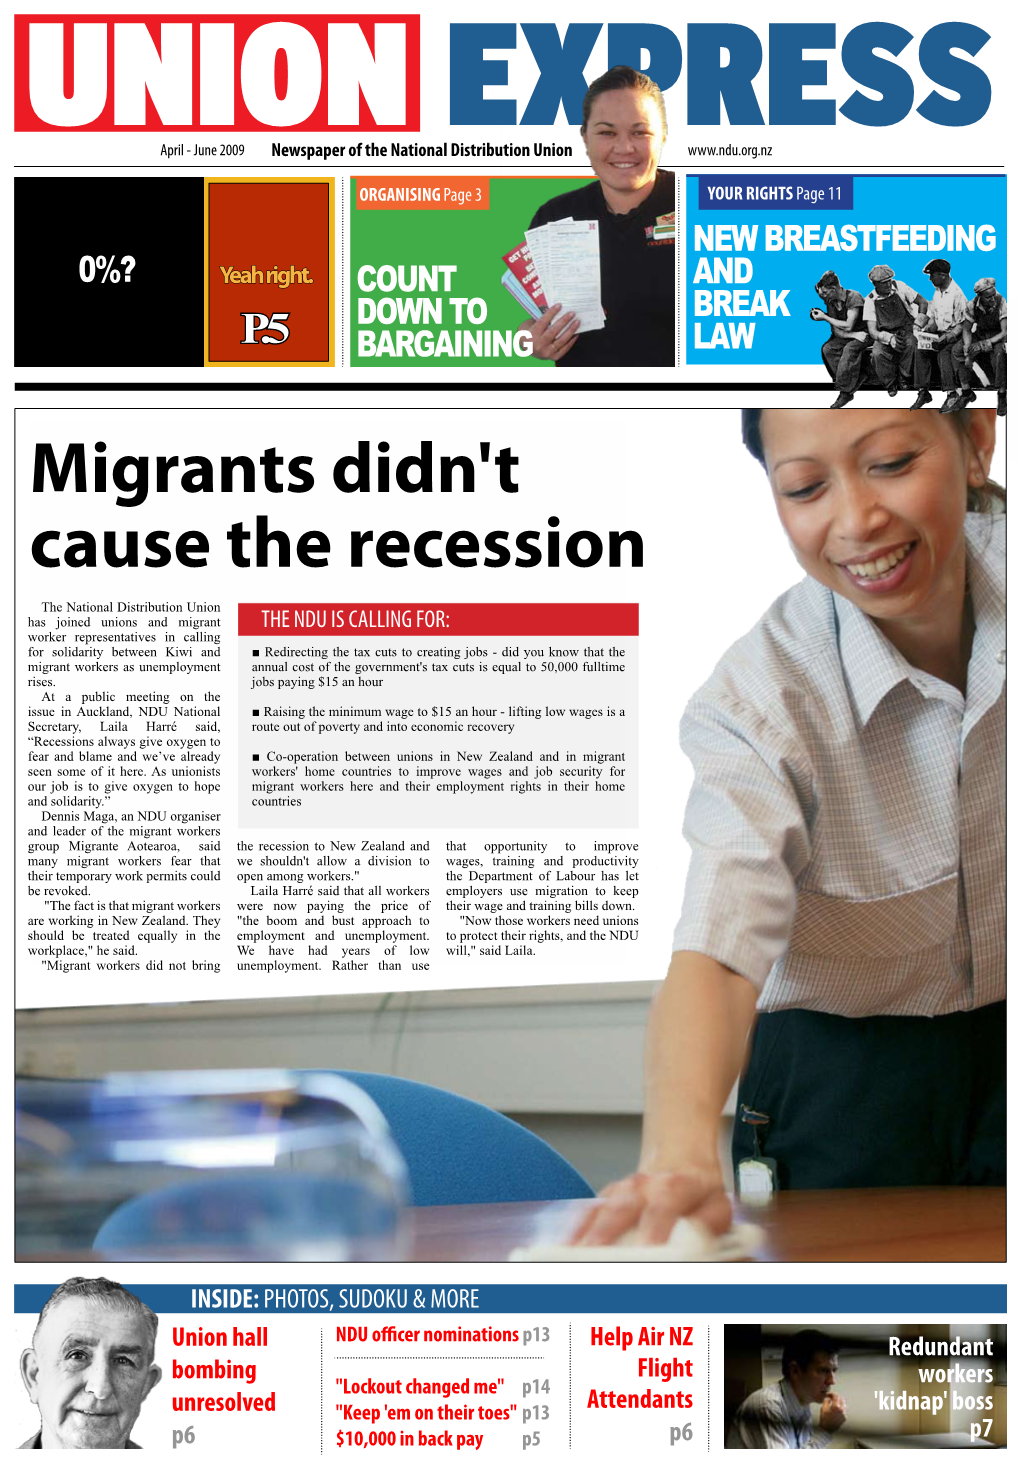 Migrants Didn't Cause the Recession